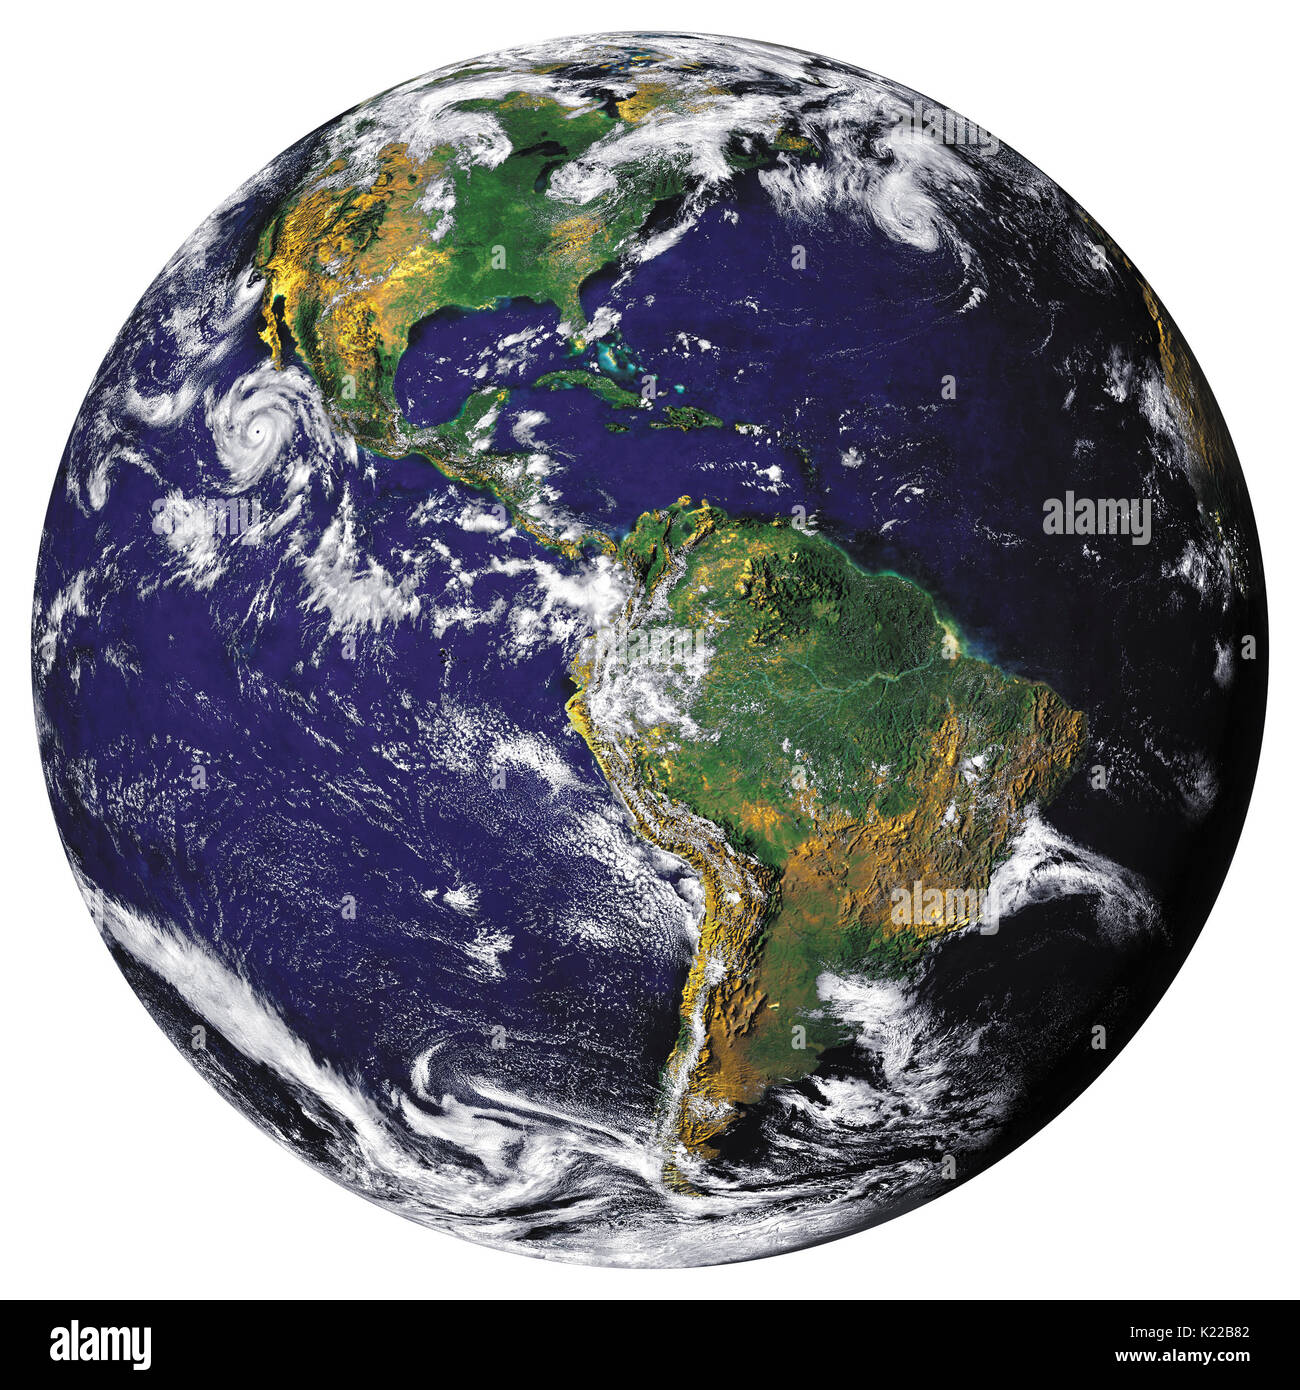 Earth is one of the four rocky planets in the solar system. Each cubic meter of the planet weighs an average of 5.5 tonnes, making it the densest body in the solar system. It is also the only planet with vast liquid oceans. Stock Photo